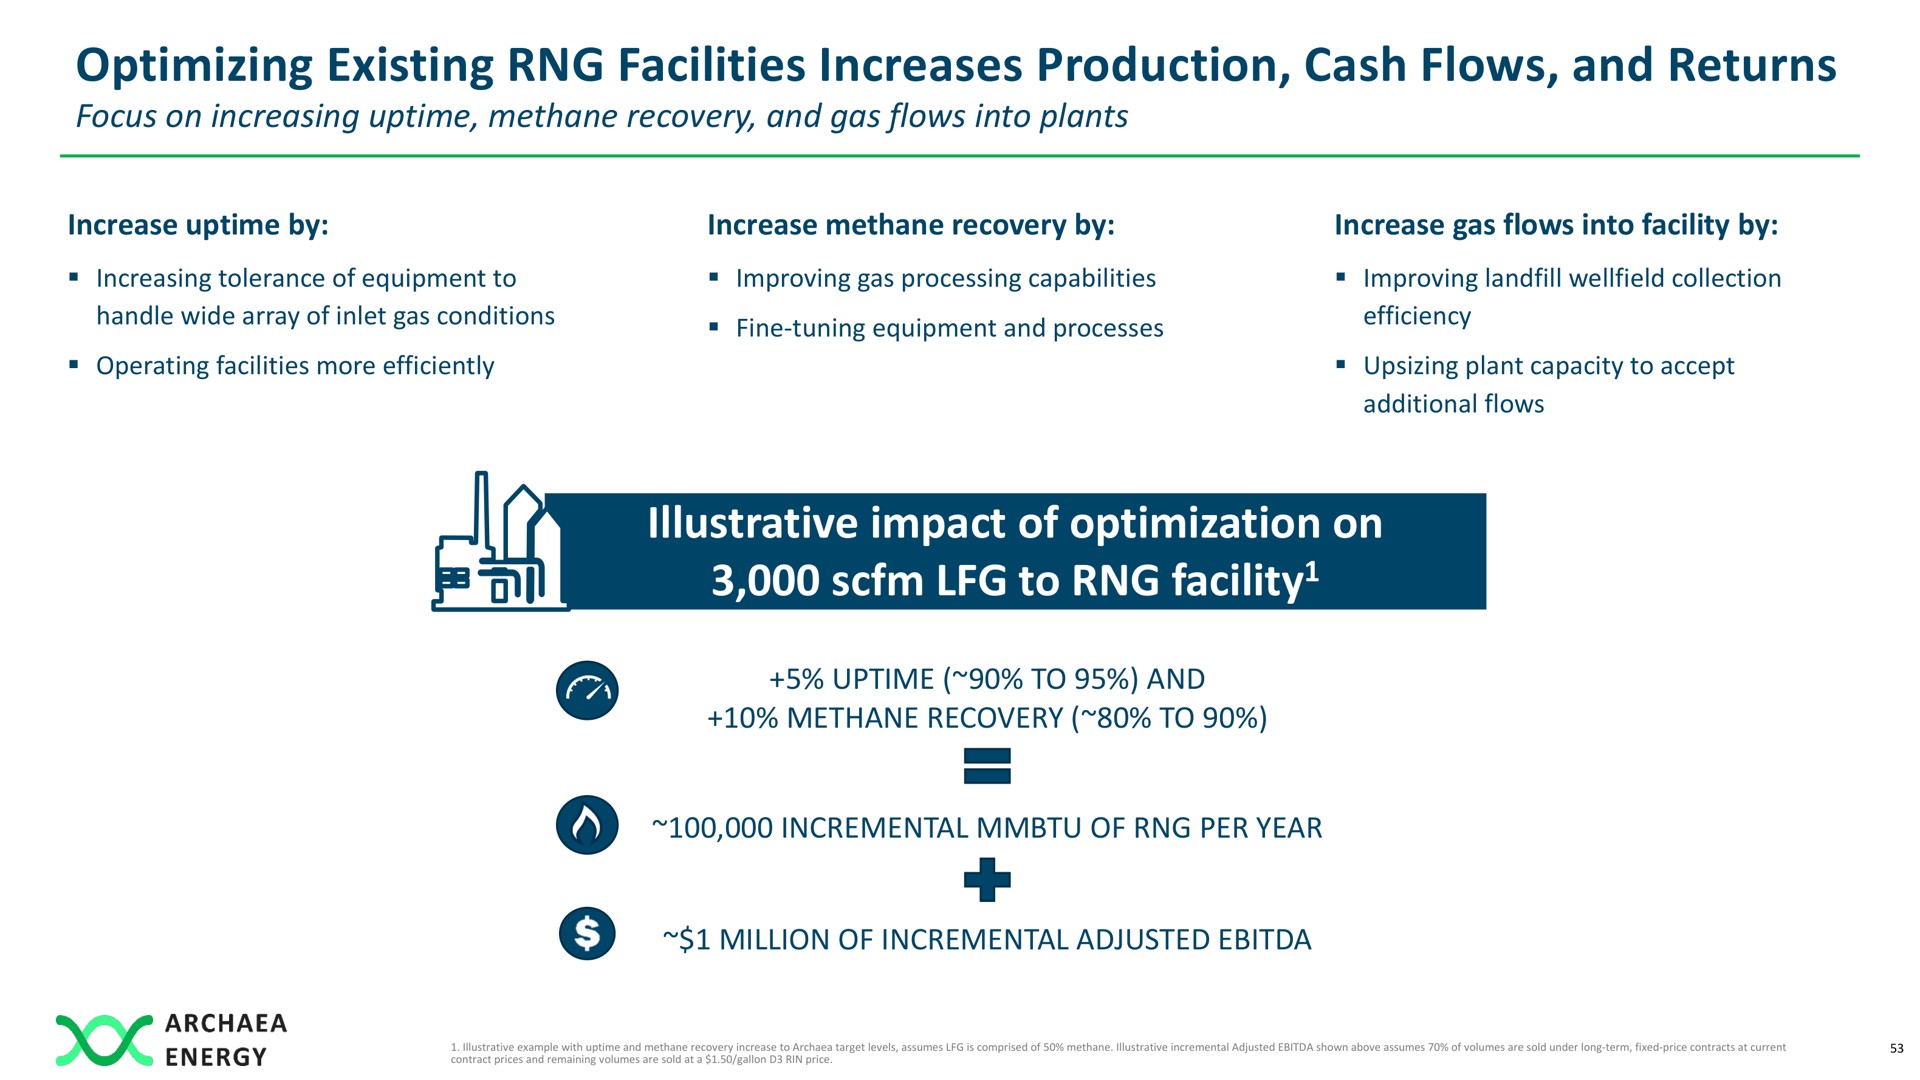 optimizing existing facilities increases production cash flows and returns illustrative impact of optimization on to facility facility | Archaea Energy